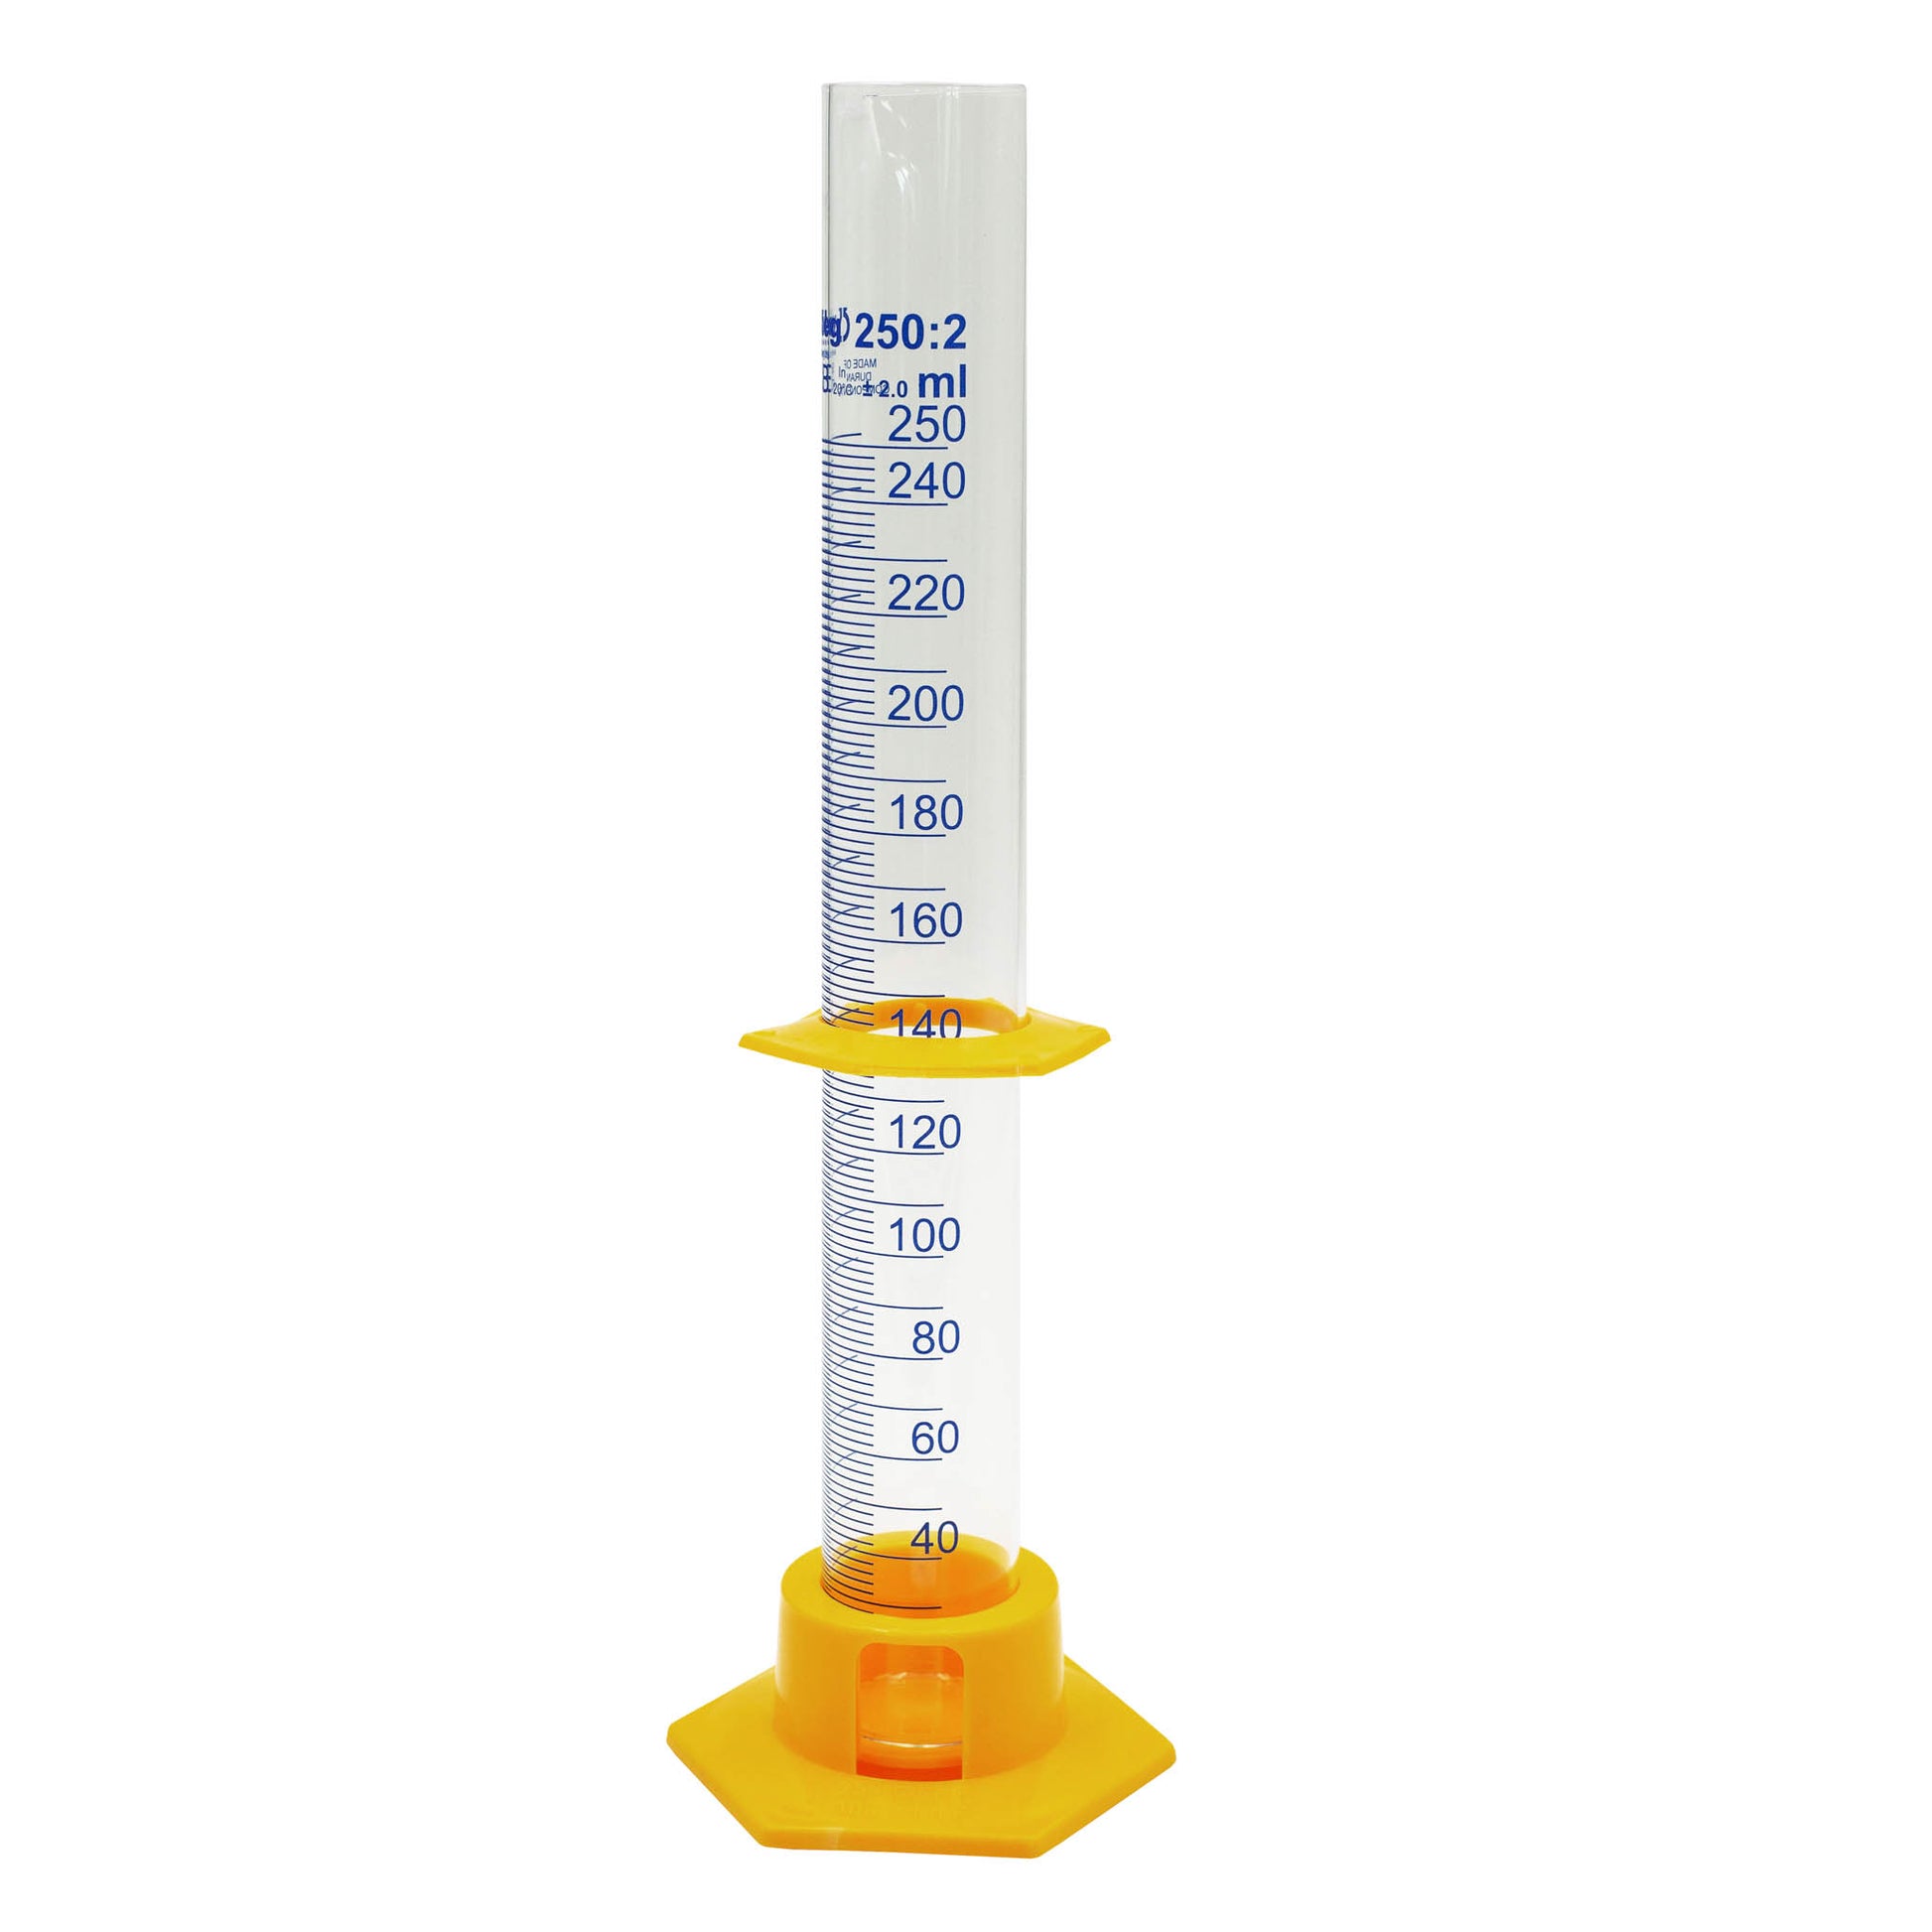 250ml glass measuring cylinder with plastic base and place holder. Measures in 2ml increments. 